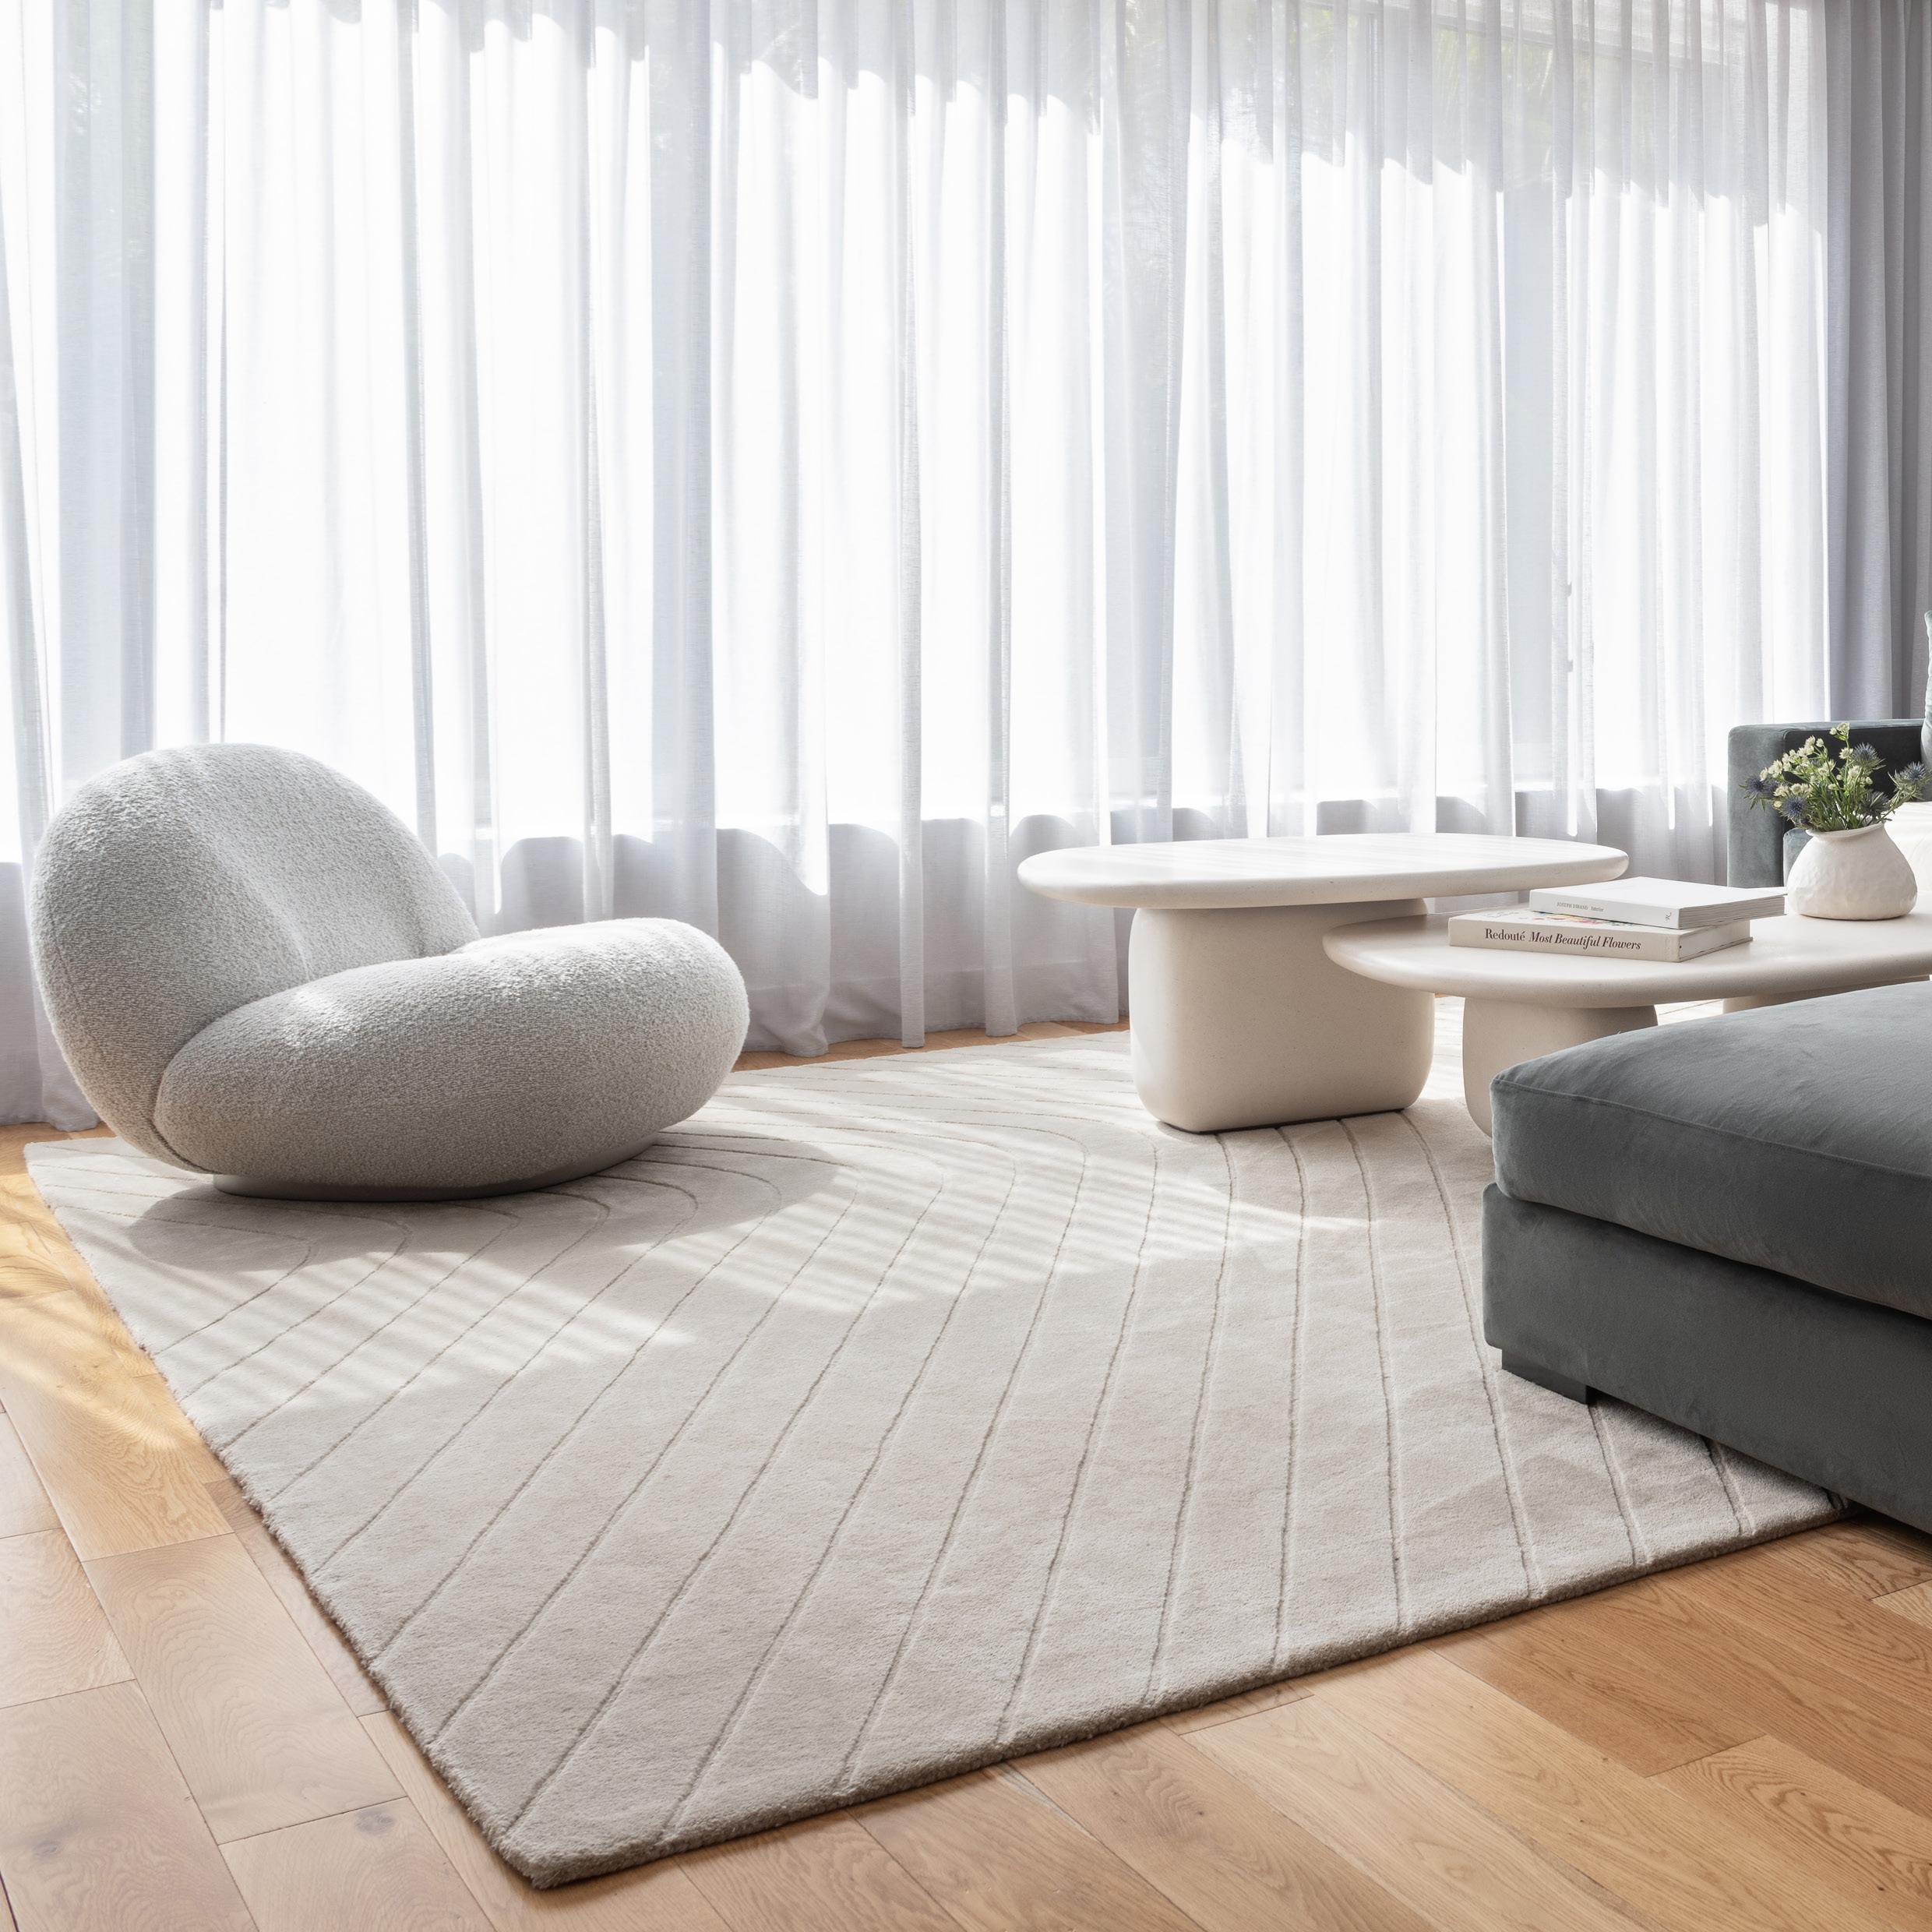 Inspired by the dry Japanese gardens, known as Karesansui, the pattern of the carpet portrays the wave motions. It’s intended to transmit calm and softness, through it’s delicate carved curves. It’s name derives from the Japanese translation of the